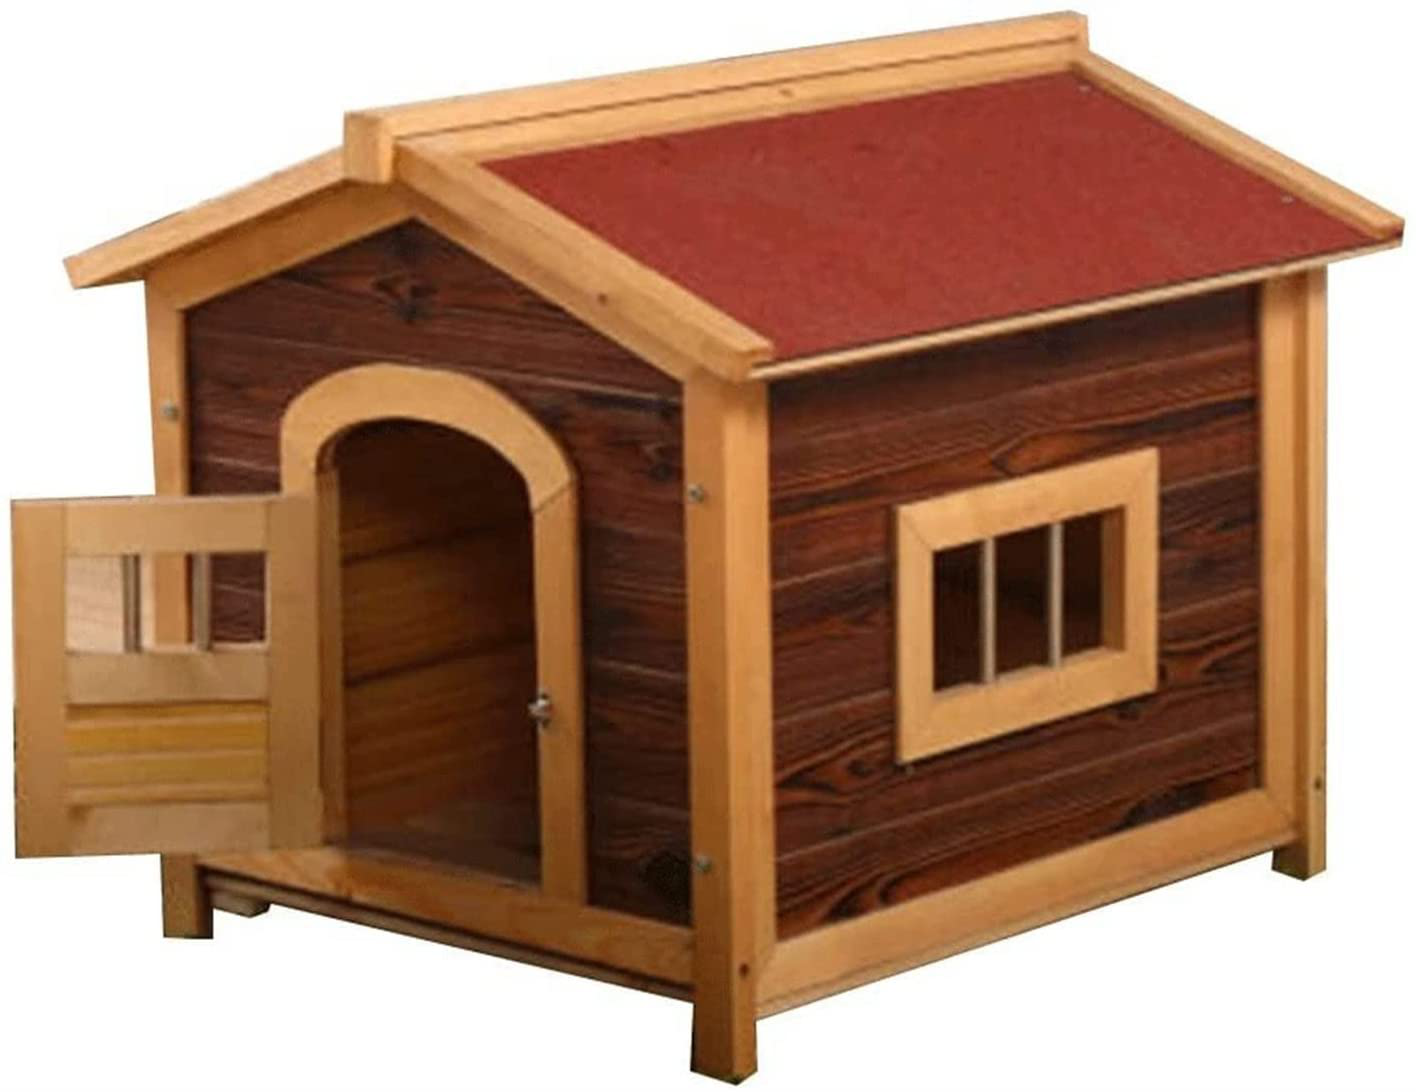 QXWJ Dog House,Wooden Outdoor Pet Log Cabin Kennel,Weather Resistant Waterproof with Door Flap Drawable Base Plate Home Pet Furniture,For Small Medium Large Animals Animals & Pet Supplies > Pet Supplies > Dog Supplies > Dog Houses QXWJ Medium  